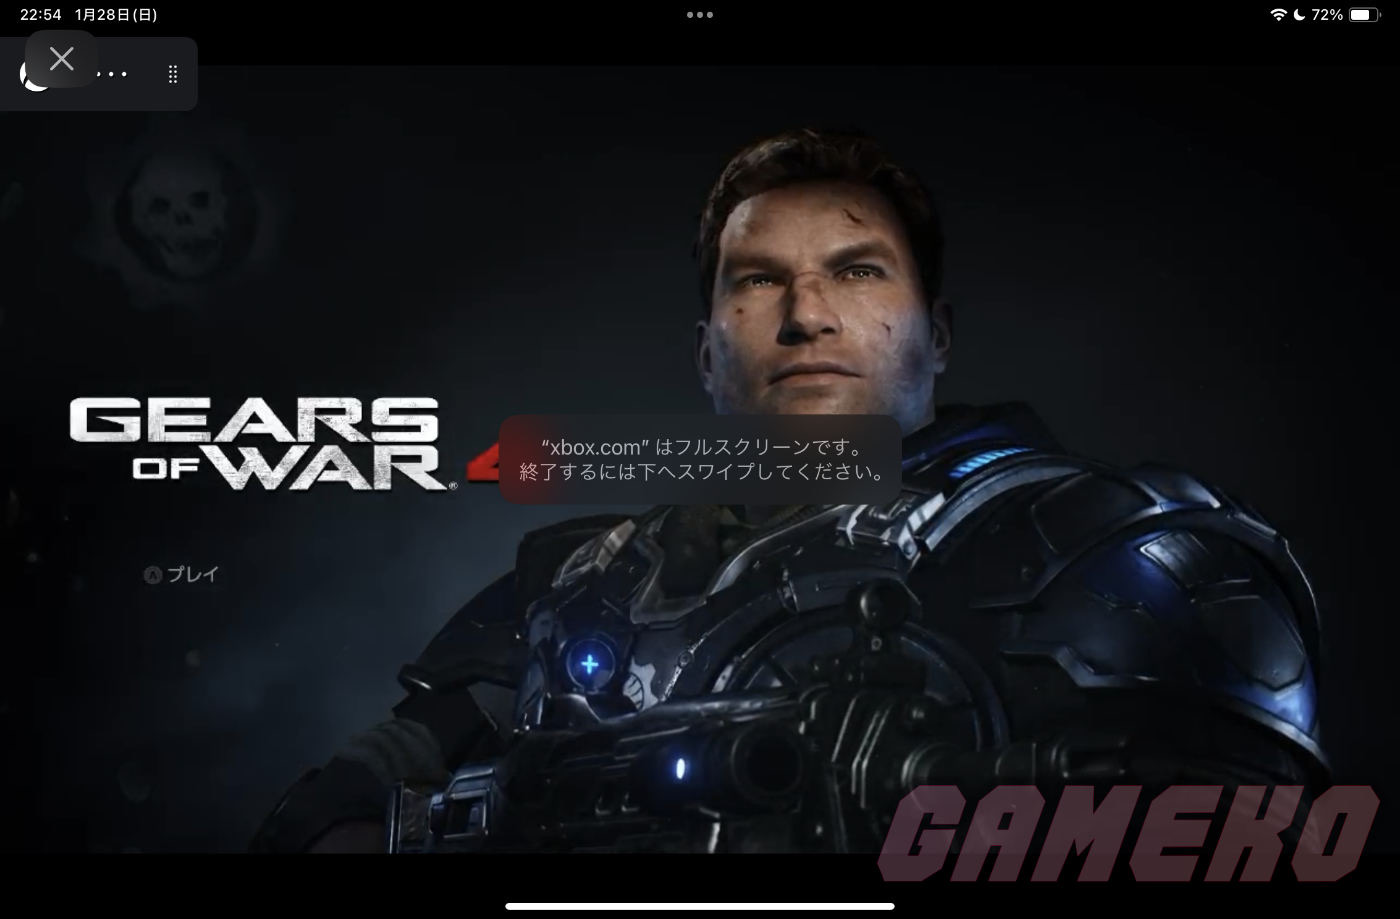 Gamepass cloudgame ipad android 5